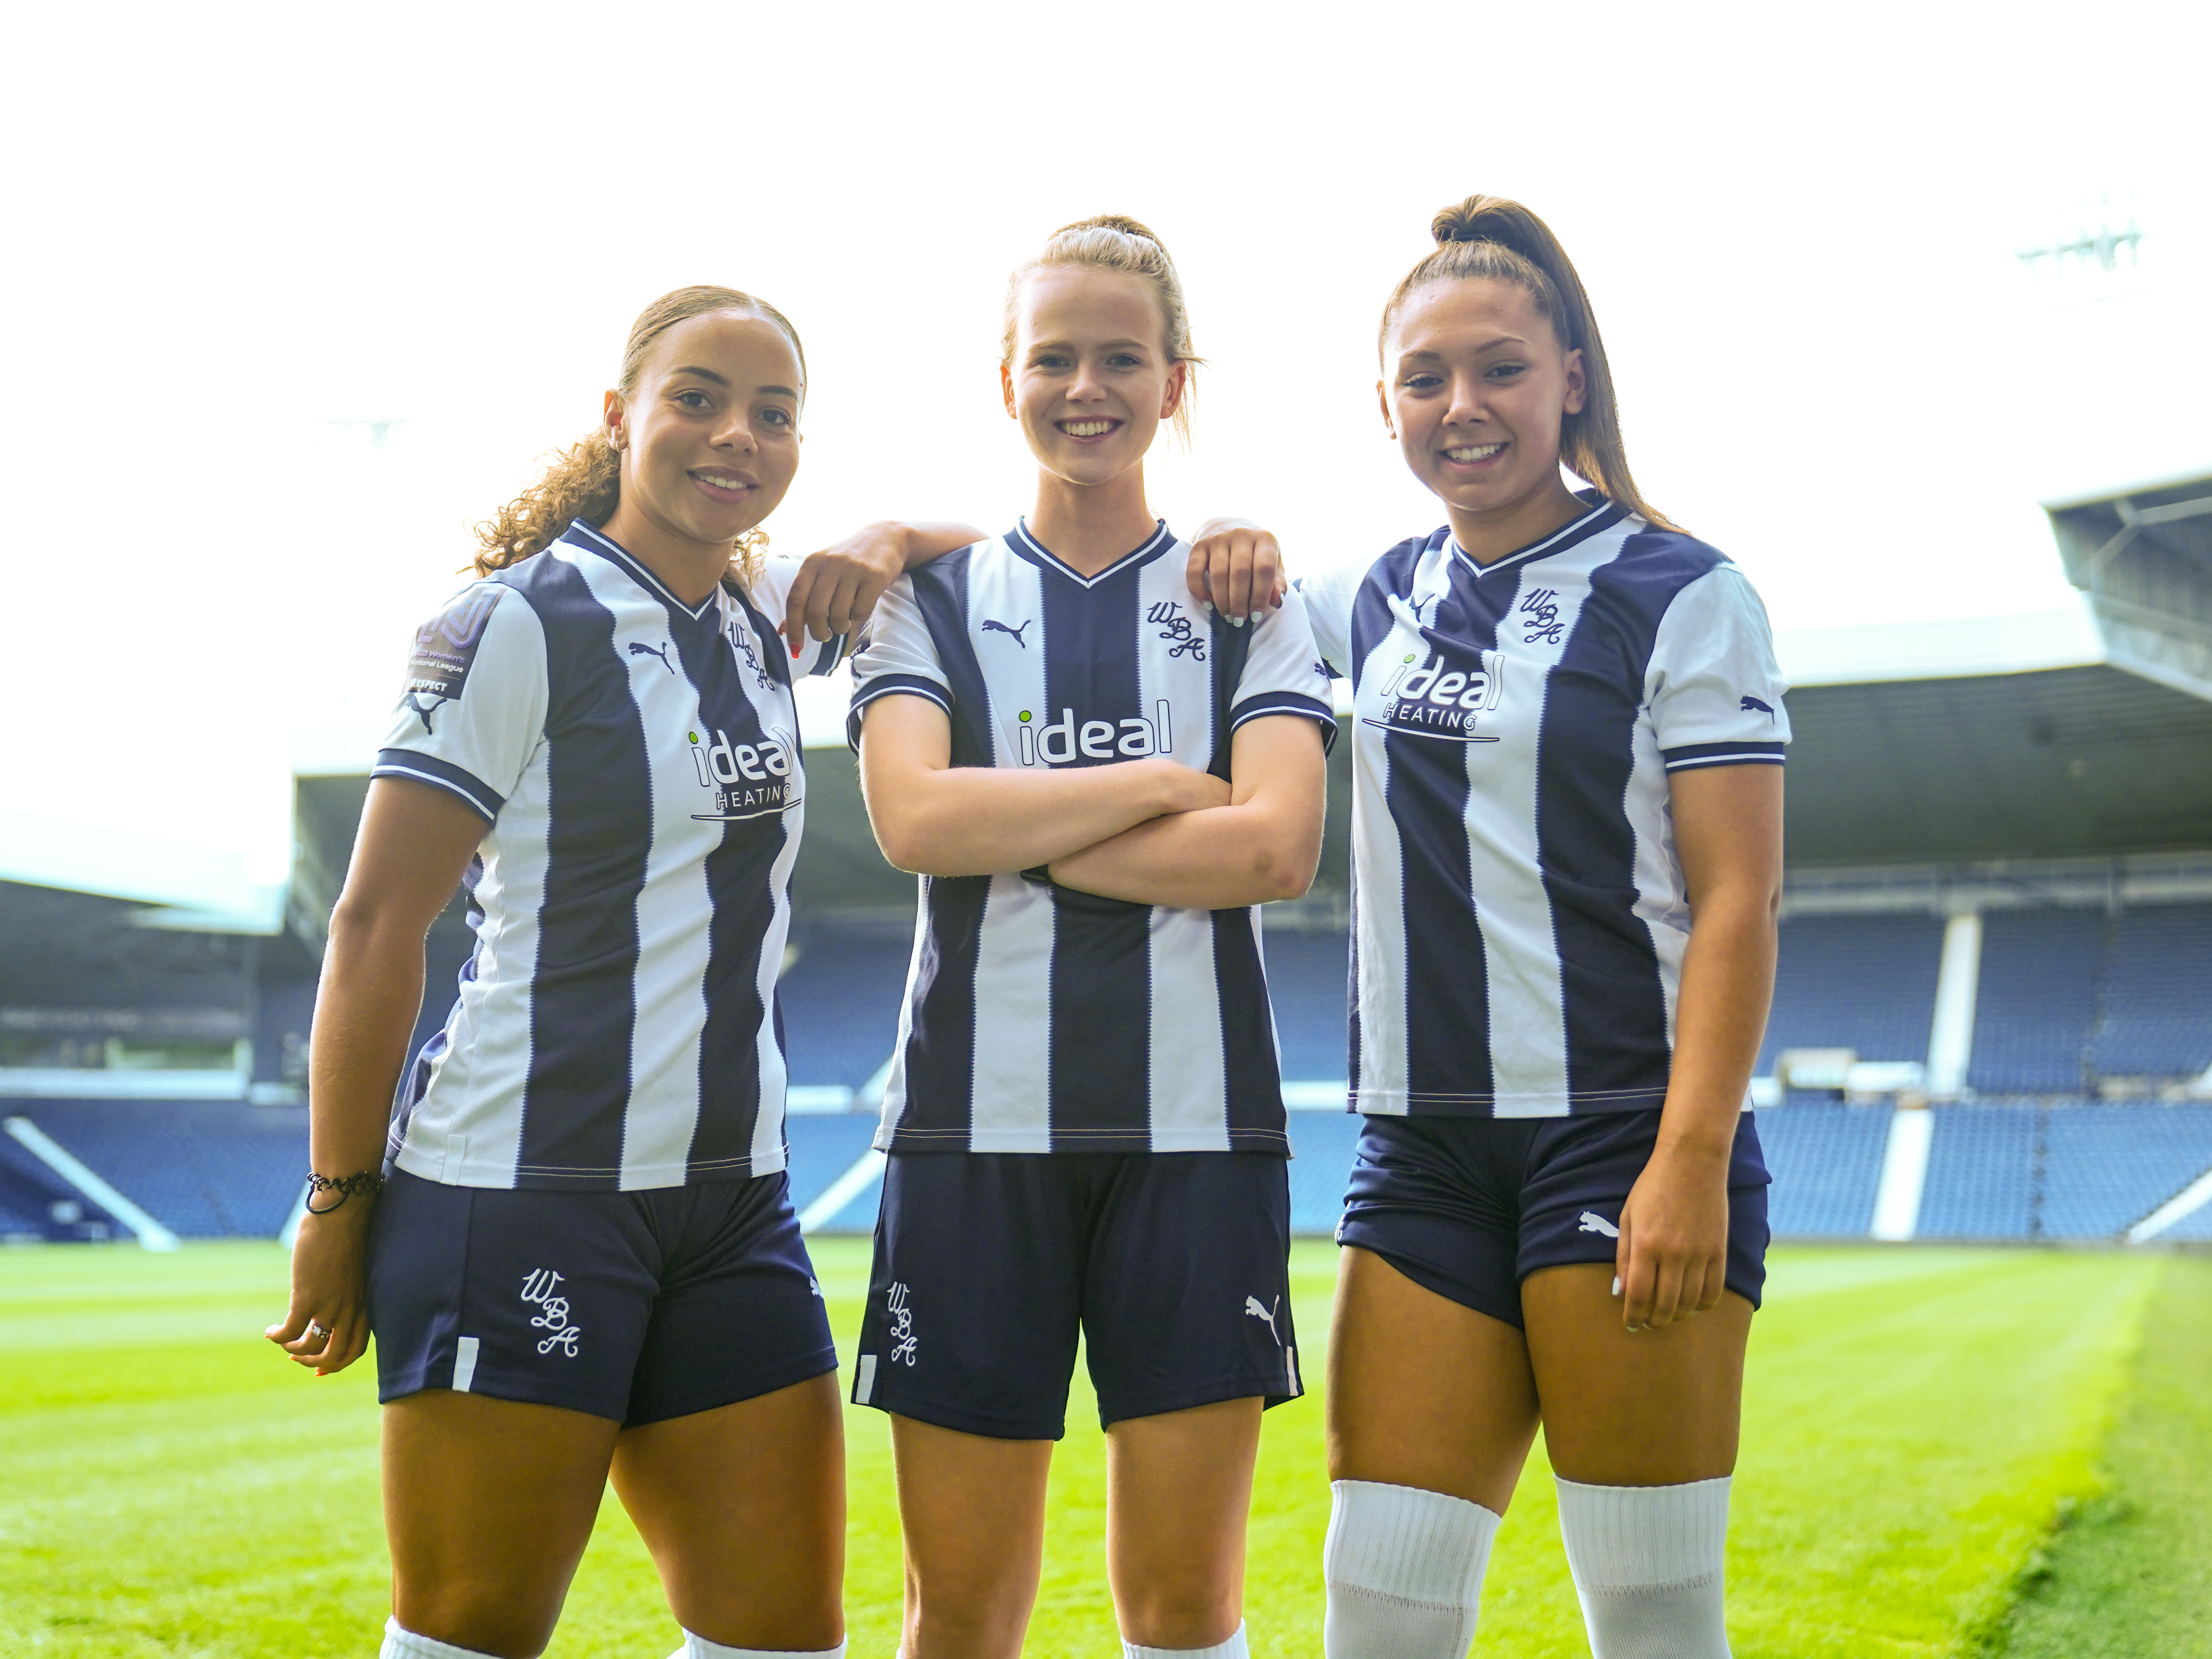 Albion women in the club's home kit with navy shorts